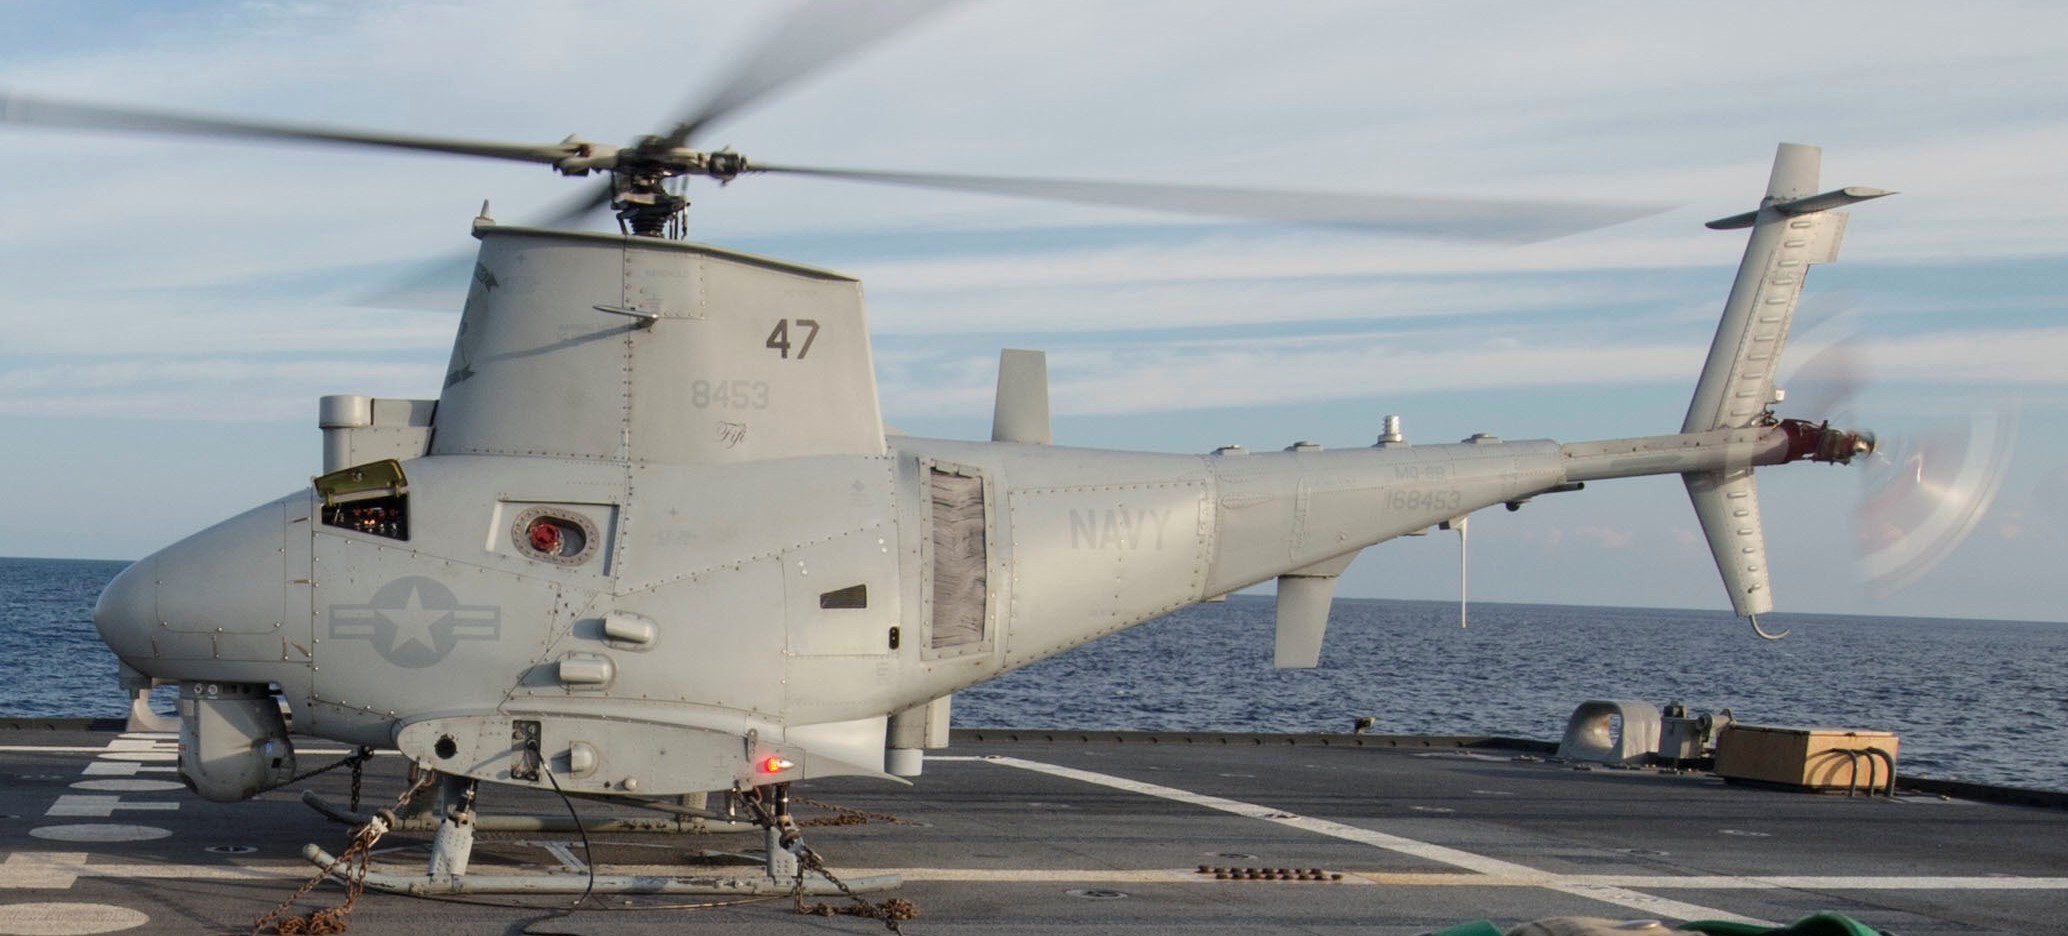 hsm-35 magicians helicopter maritime strike squadron us navy mq-8b fire scout uav 15